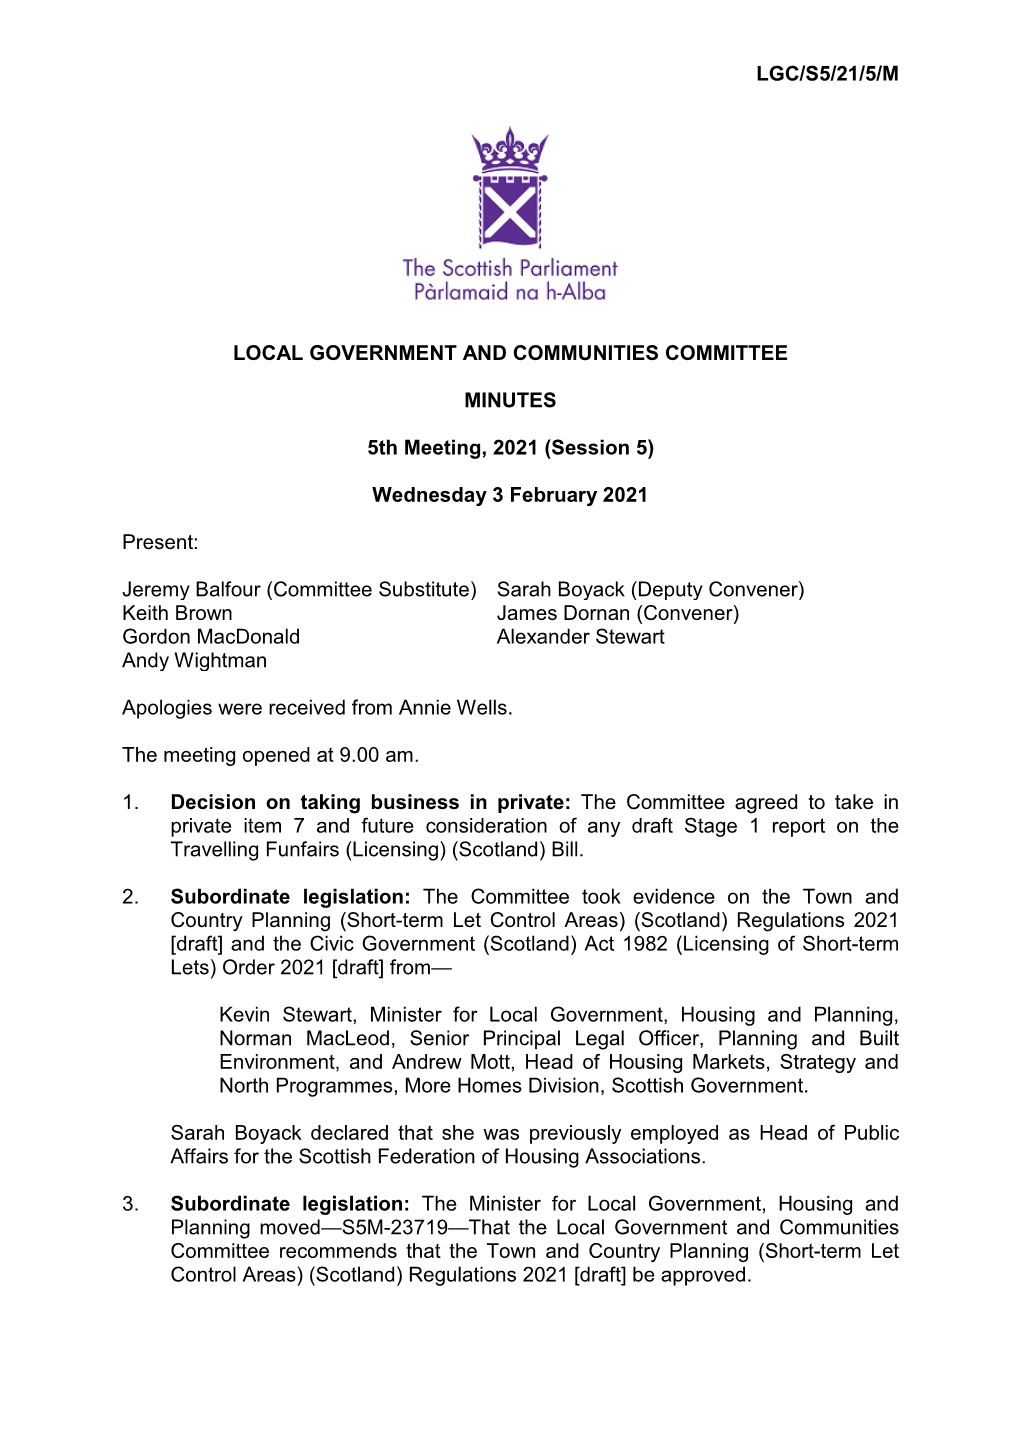 LGC/S5/21/5/M LOCAL GOVERNMENT and COMMUNITIES COMMITTEE MINUTES 5Th Meeting, 2021 (Session 5) Wednesday 3 February 2021 Present